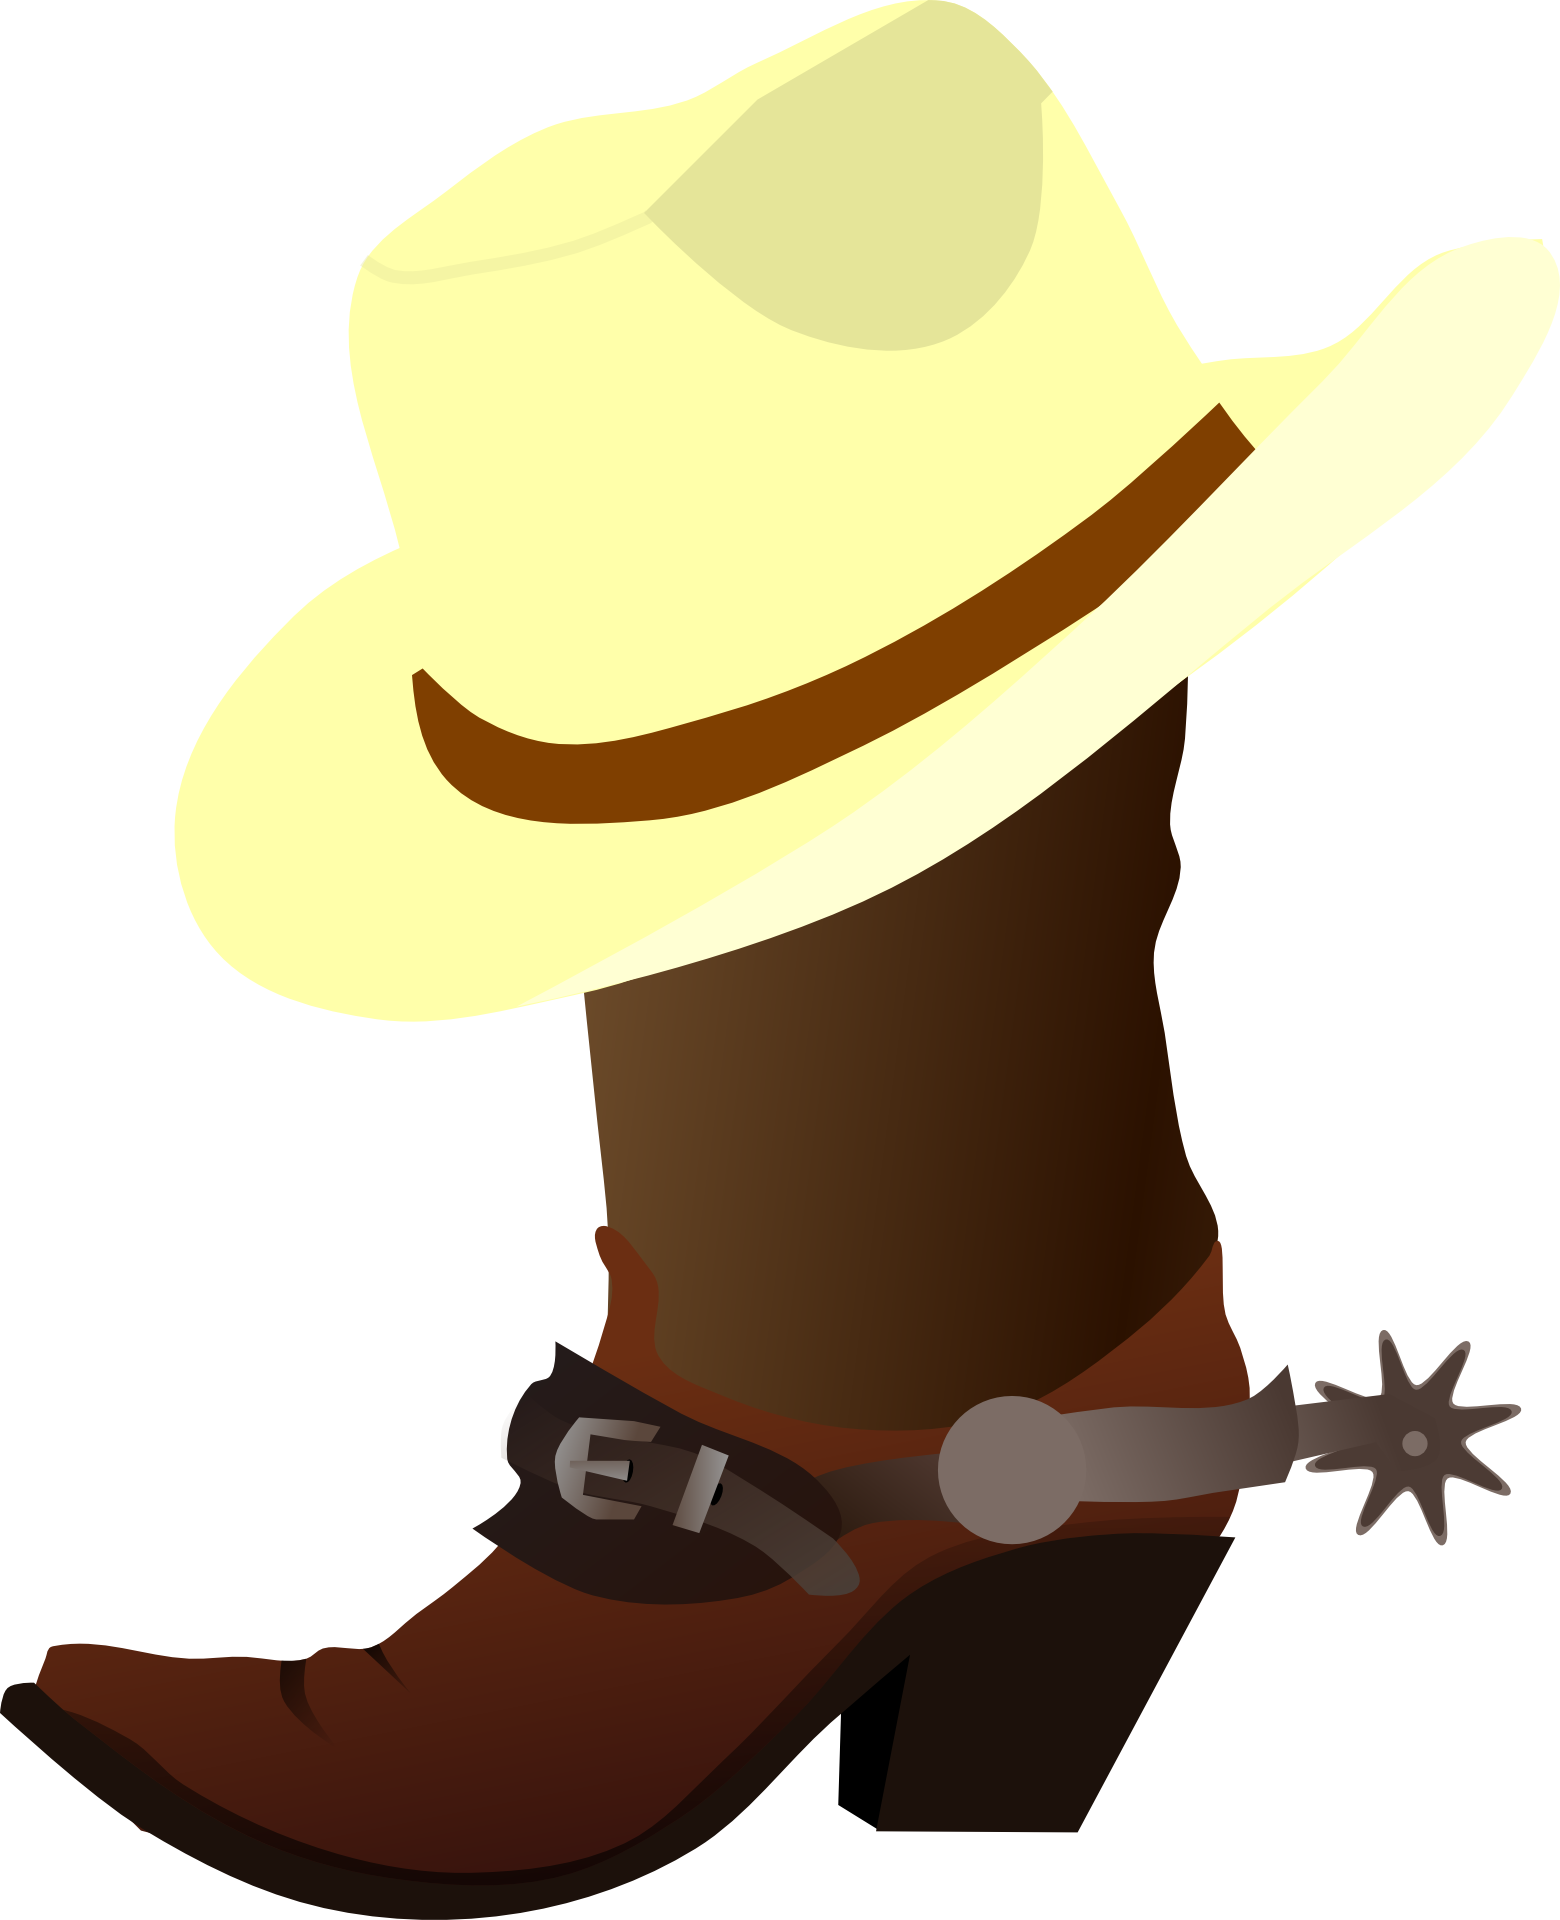 25 254169 white cowboy hat and boots clip art at clker cowboy boot clip